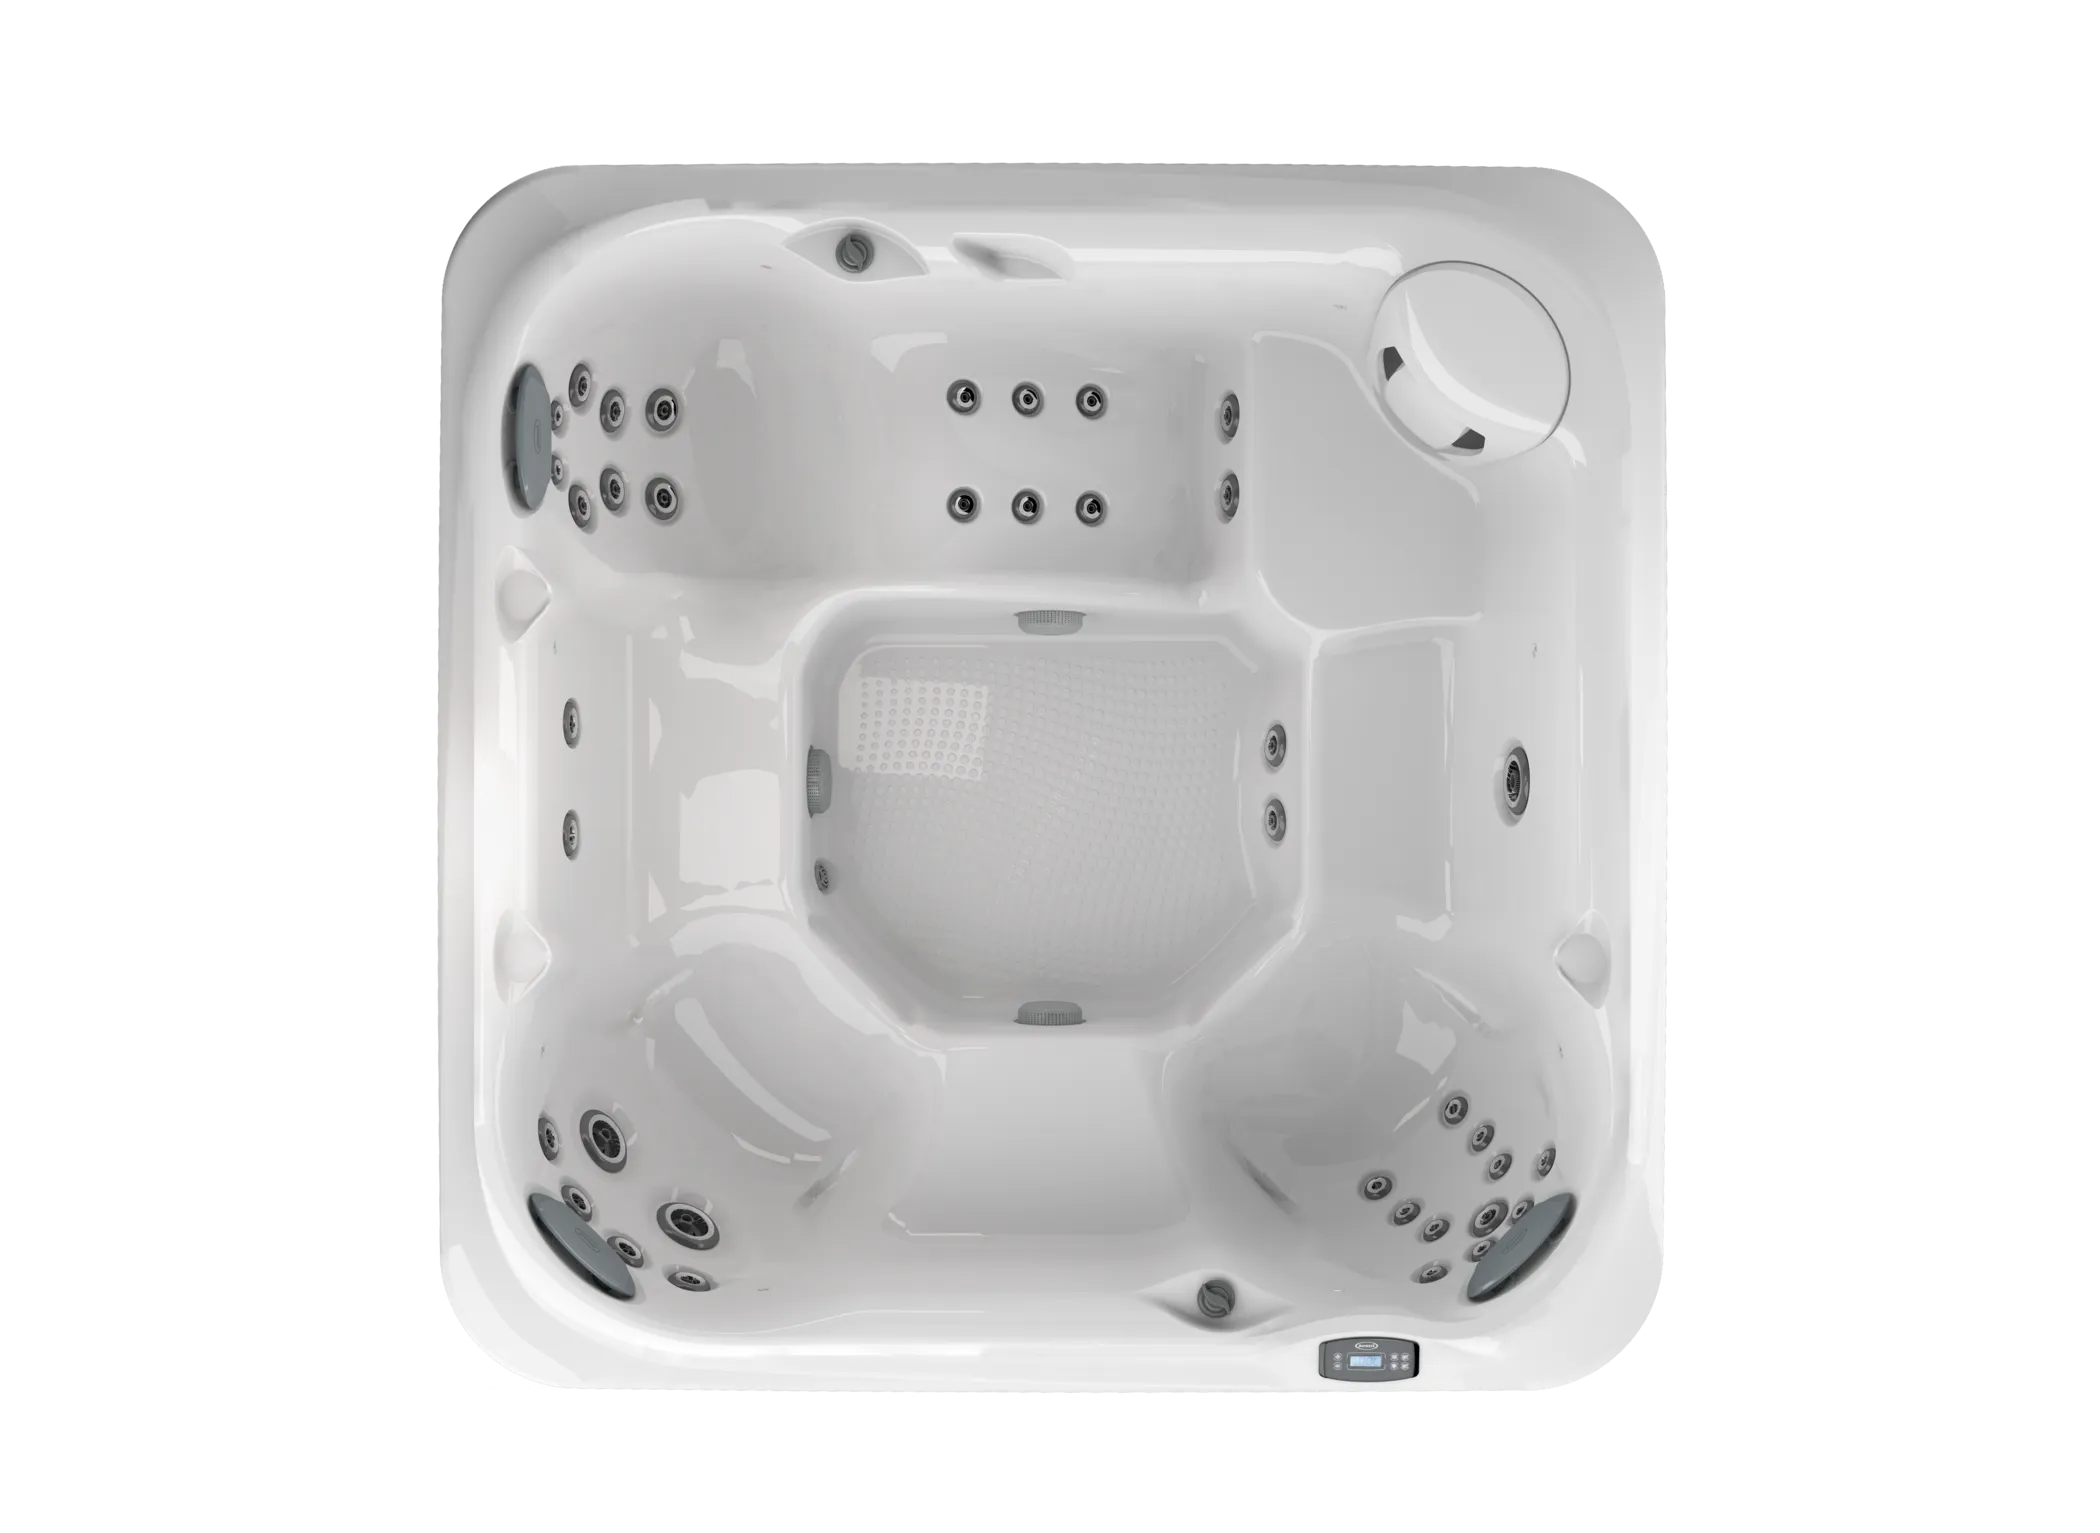 J-275™ SPACIOUS HOT TUB WITH LOUNGE SEATING